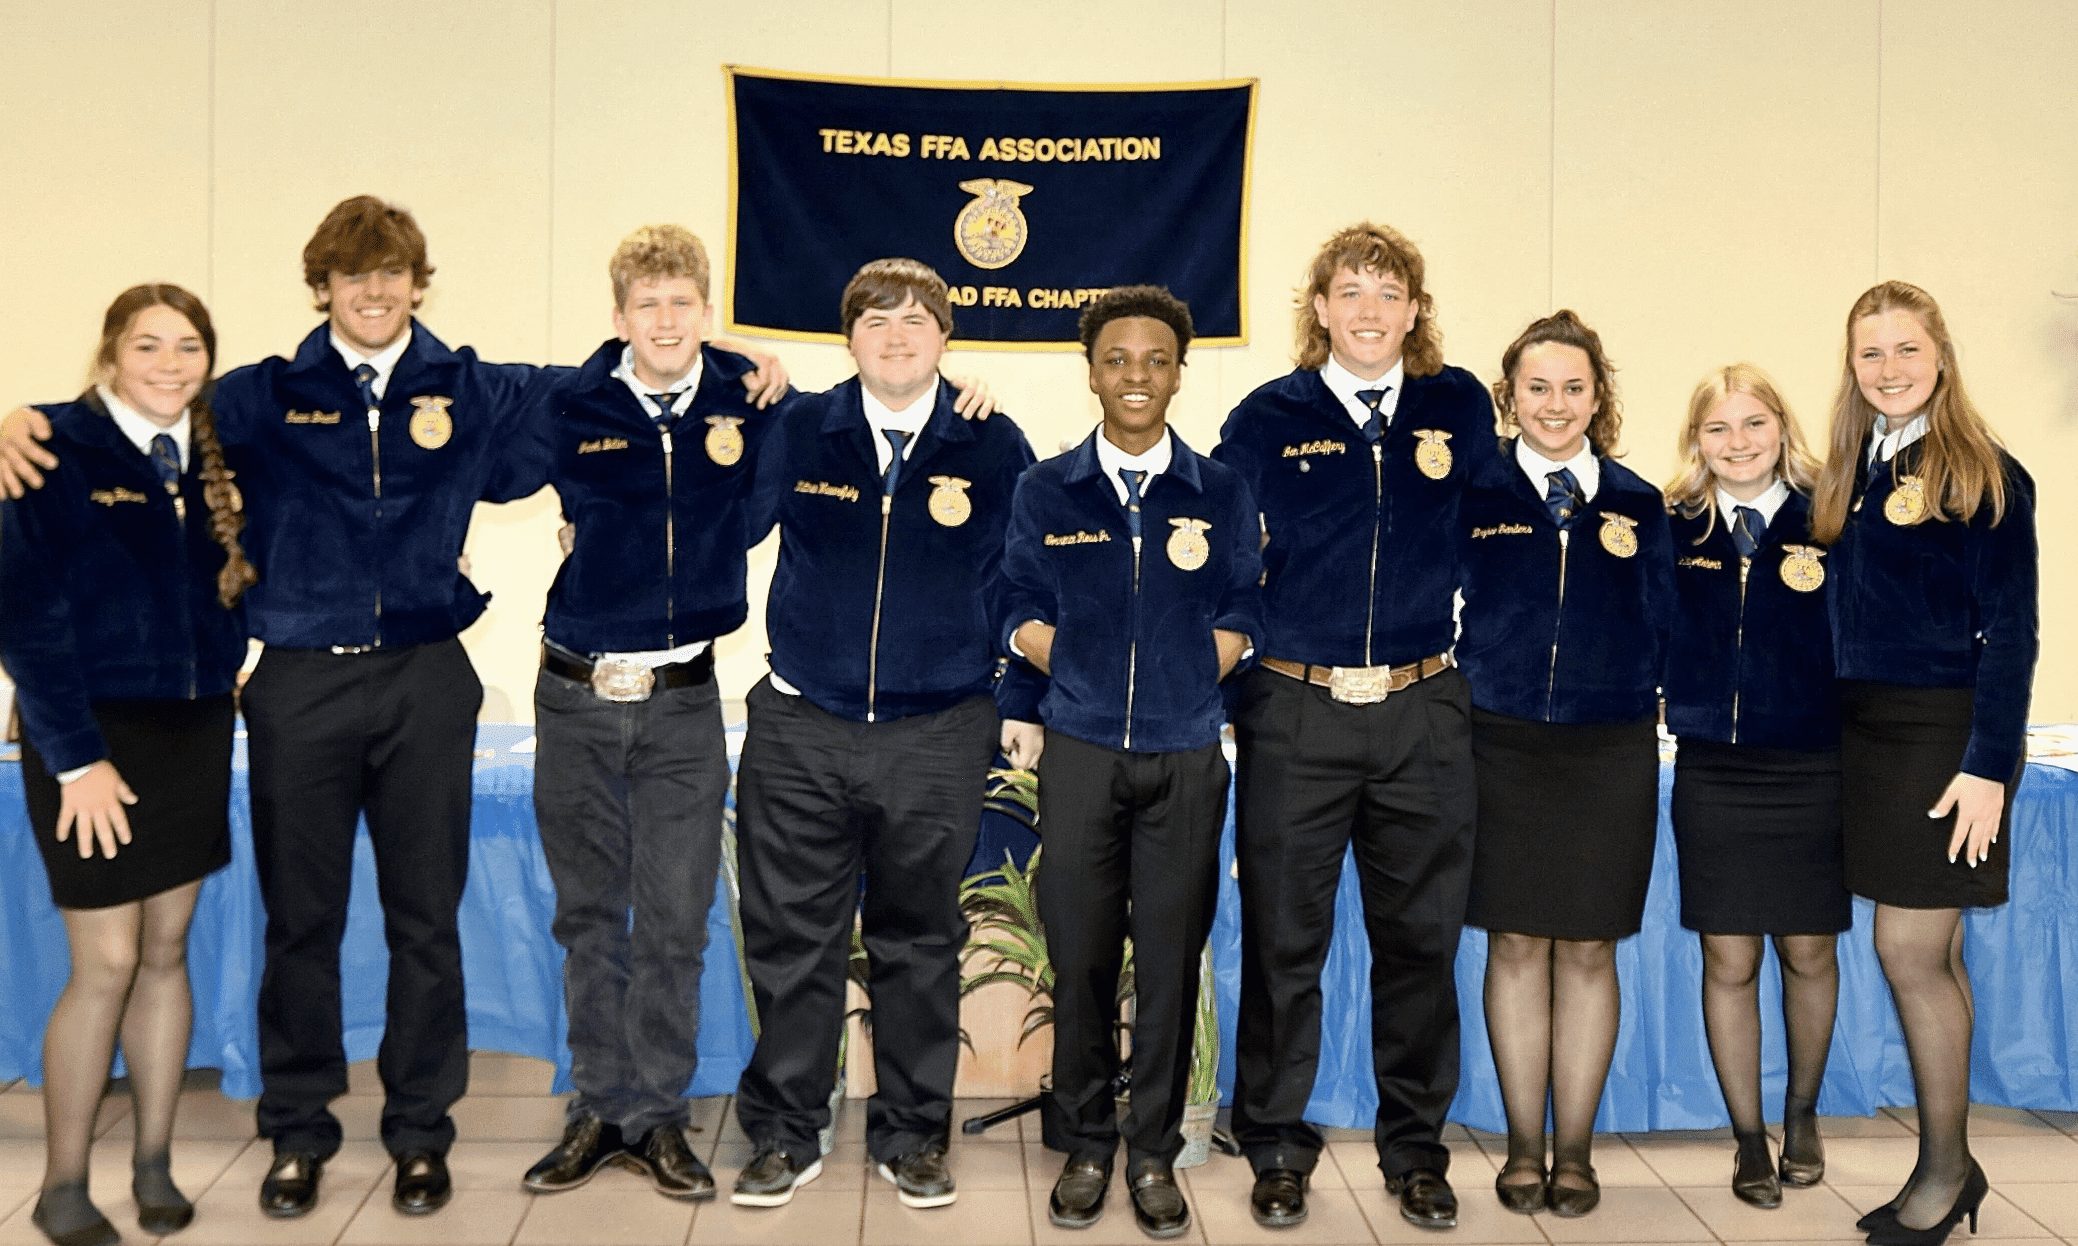 Texas FFA Members Arrive in DFW for Annual Convention Dallas Express